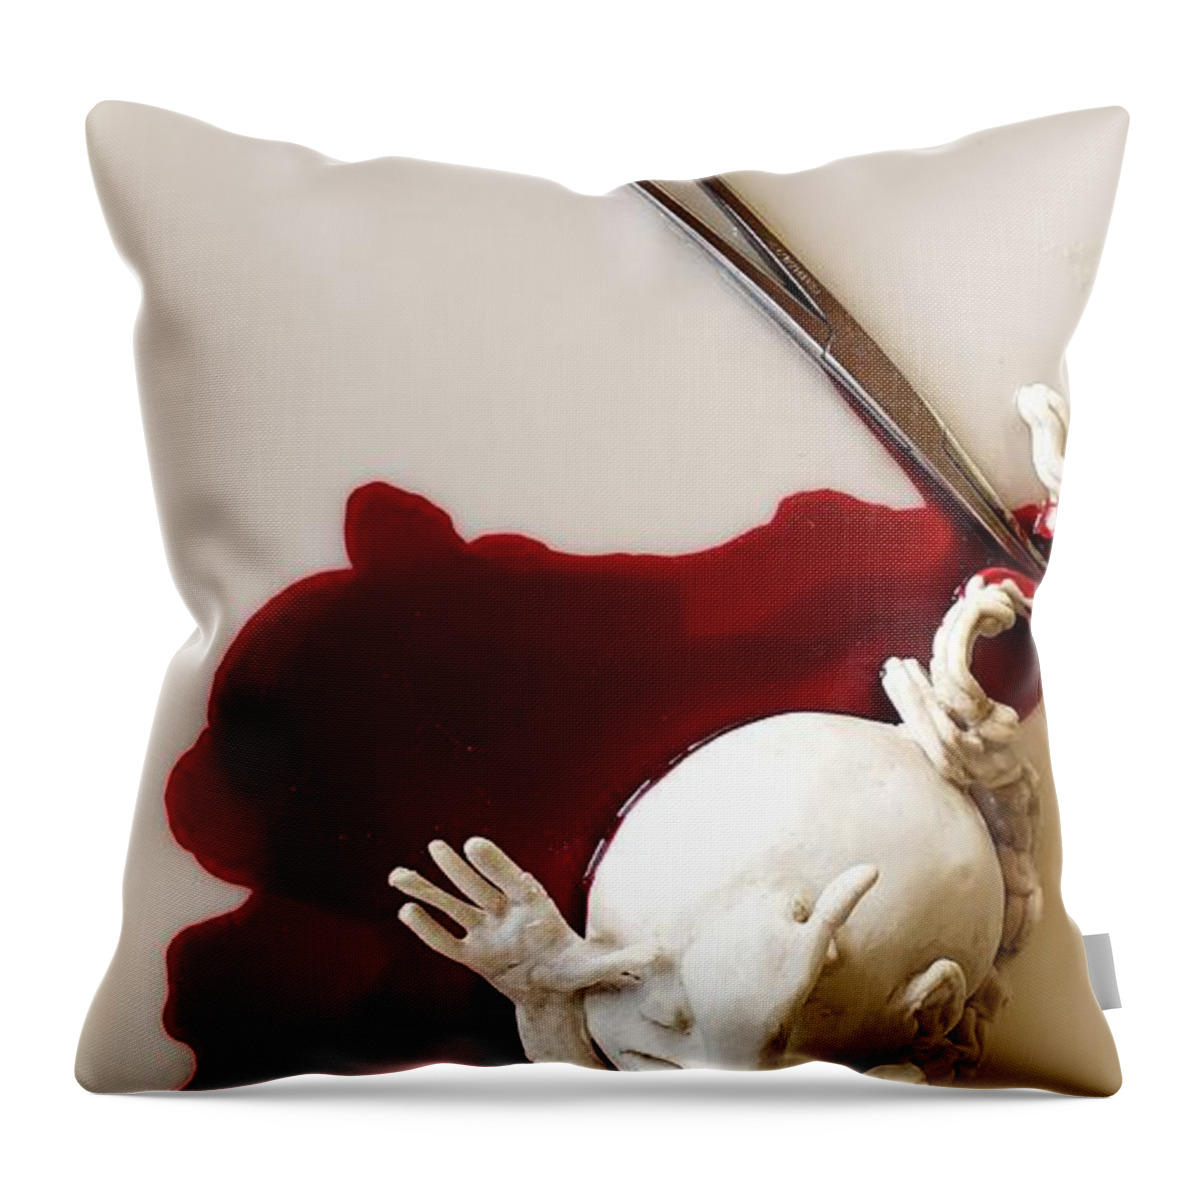 Abortion Throw Pillow featuring the mixed media Medical Waste by Merana Cadorette